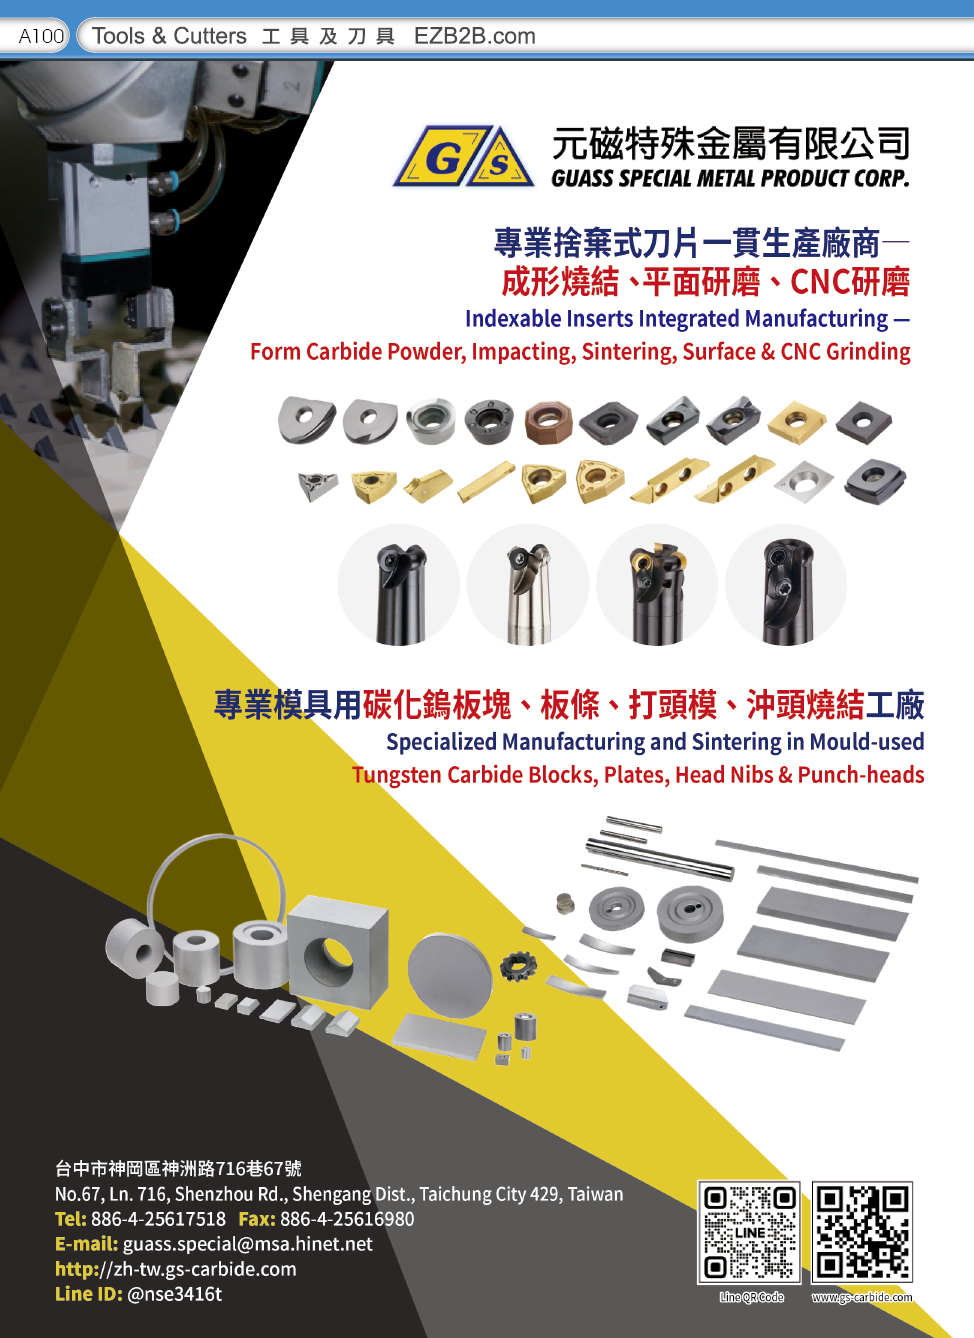 GUASS SPECIAL METAL PRODUCTS CO., LTD.